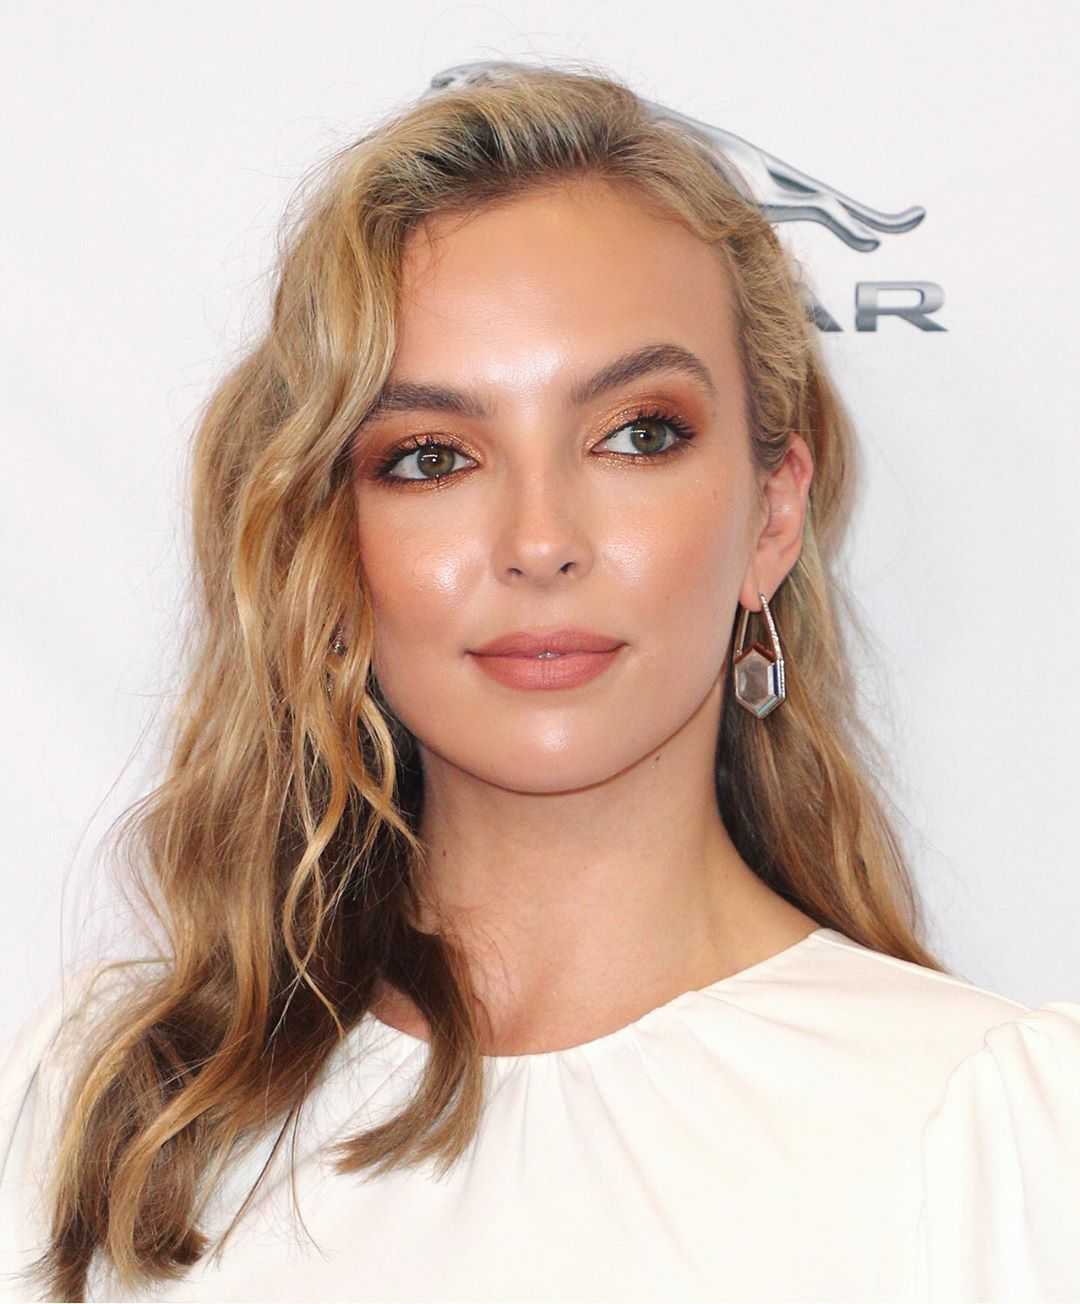 70+ Hot Pictures Of Jodie Comer Which Will Make You Sweat All Over 453